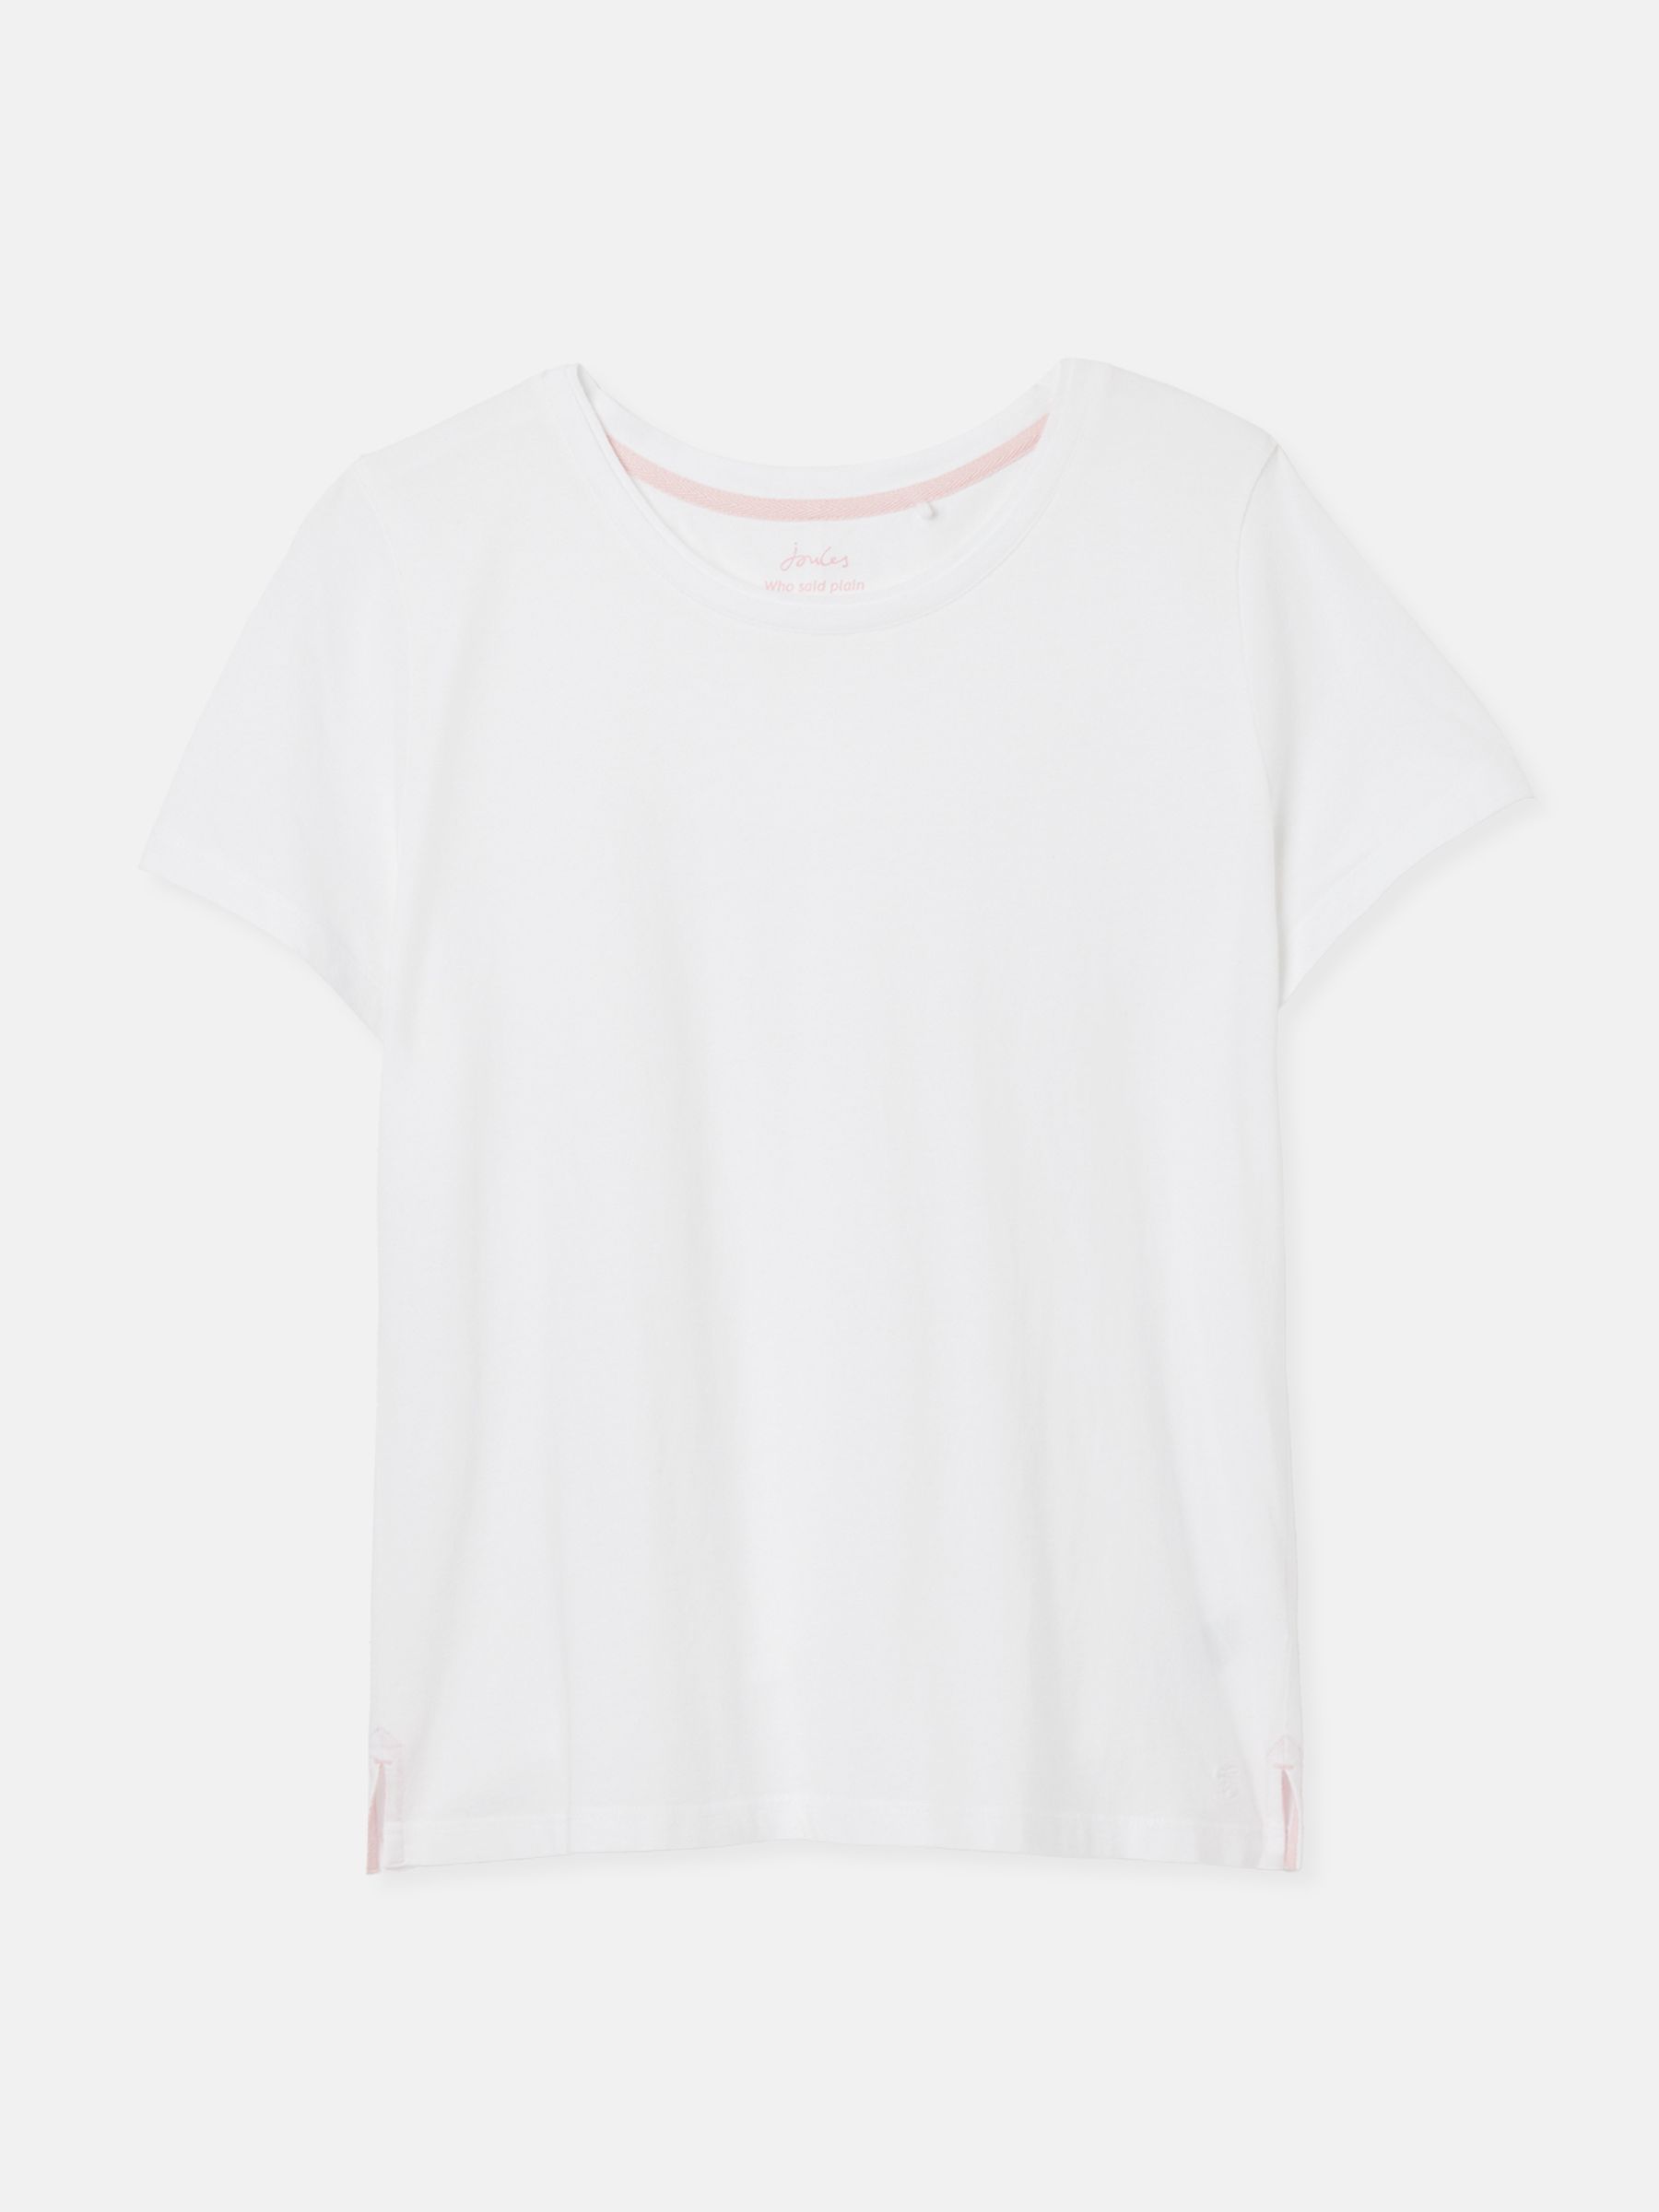 Buy Joules Frankie Crew T-Shirt from the Joules online shop